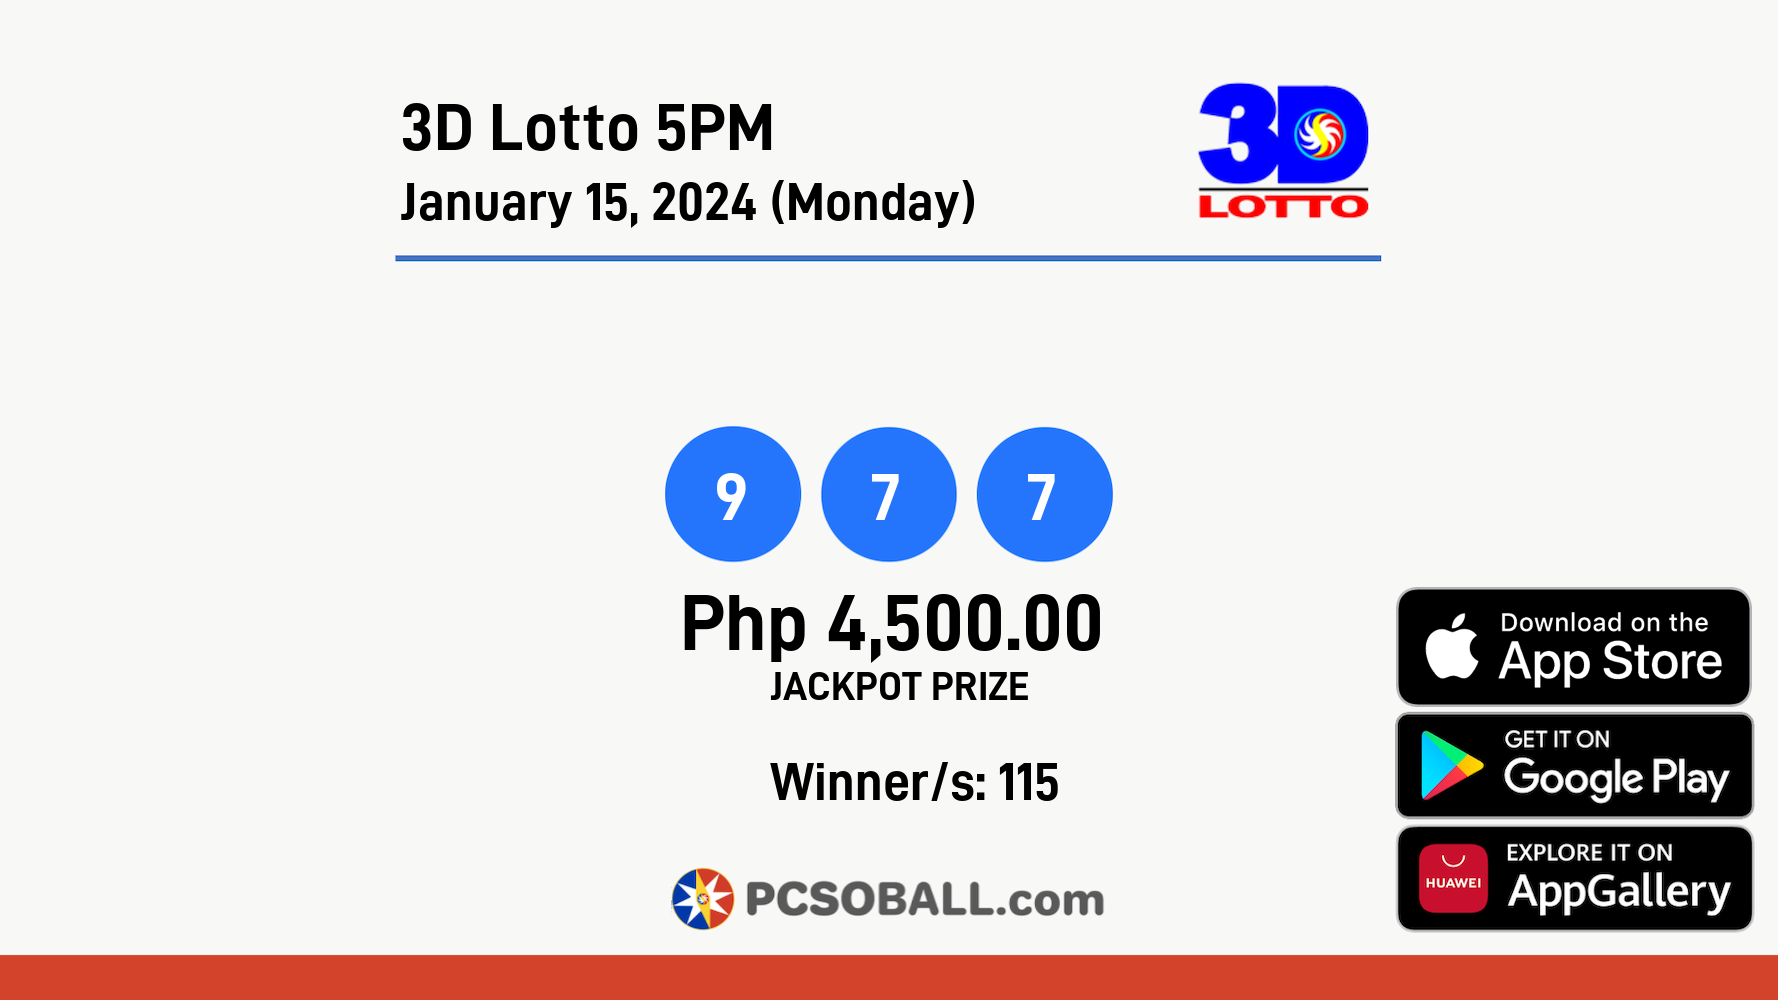 3D Lotto 5PM January 15, 2024 (Monday) Result